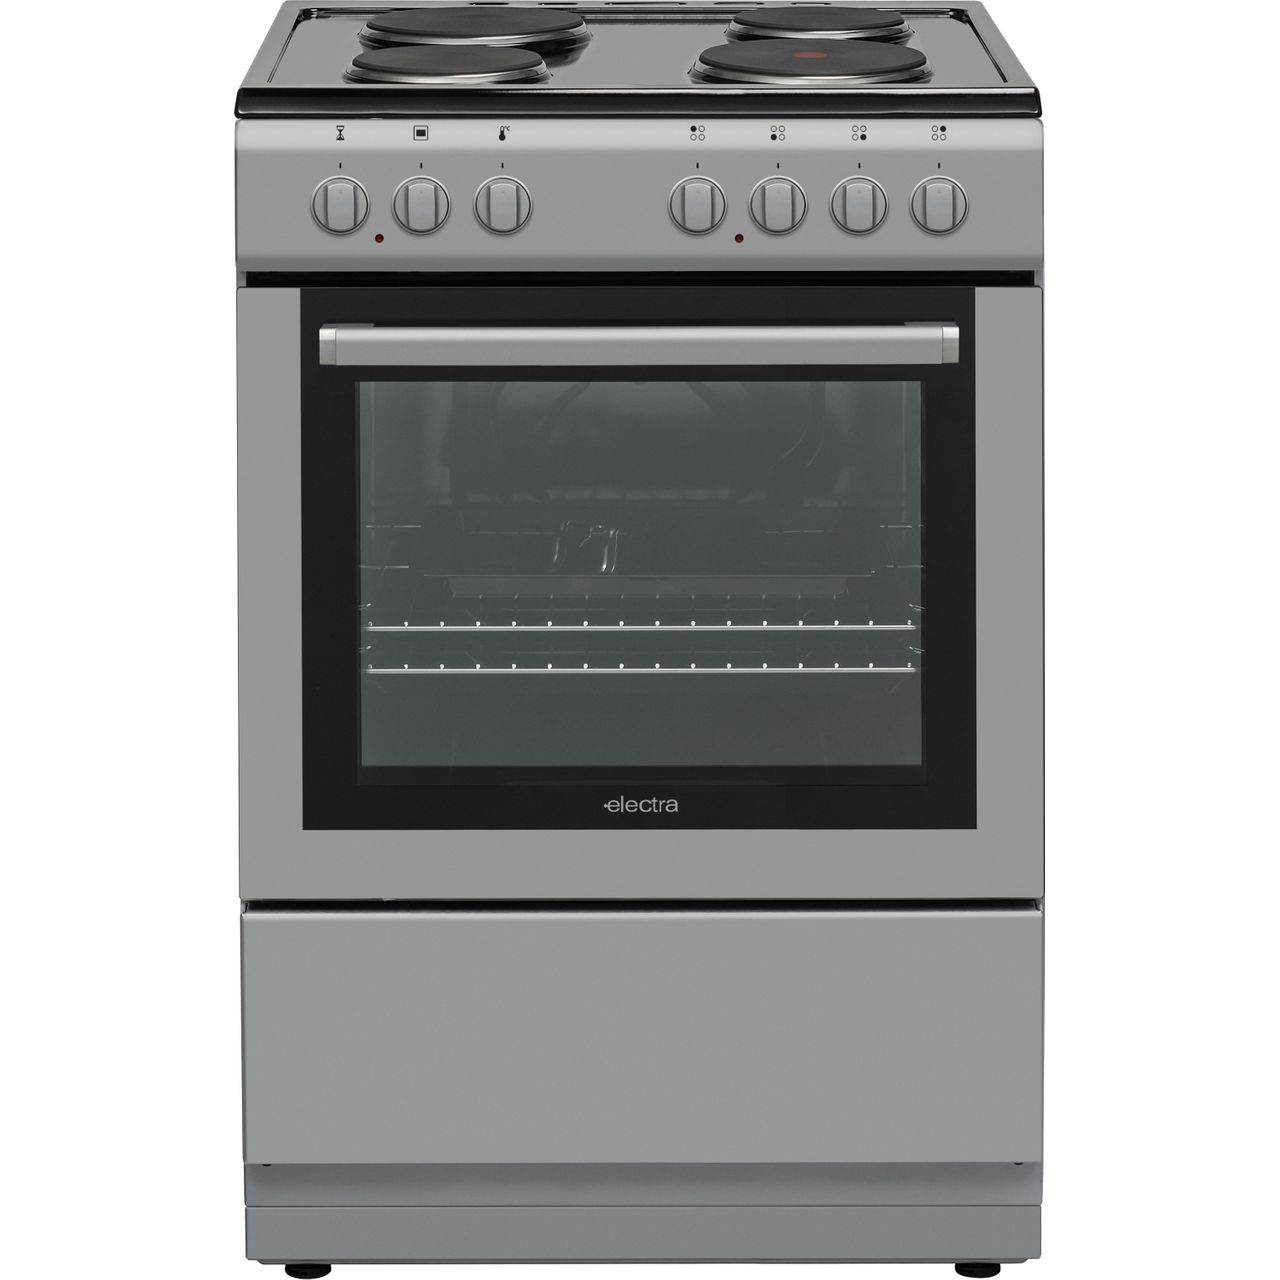 Electra SE60S Electric Cooker with Solid Plate Hob Review